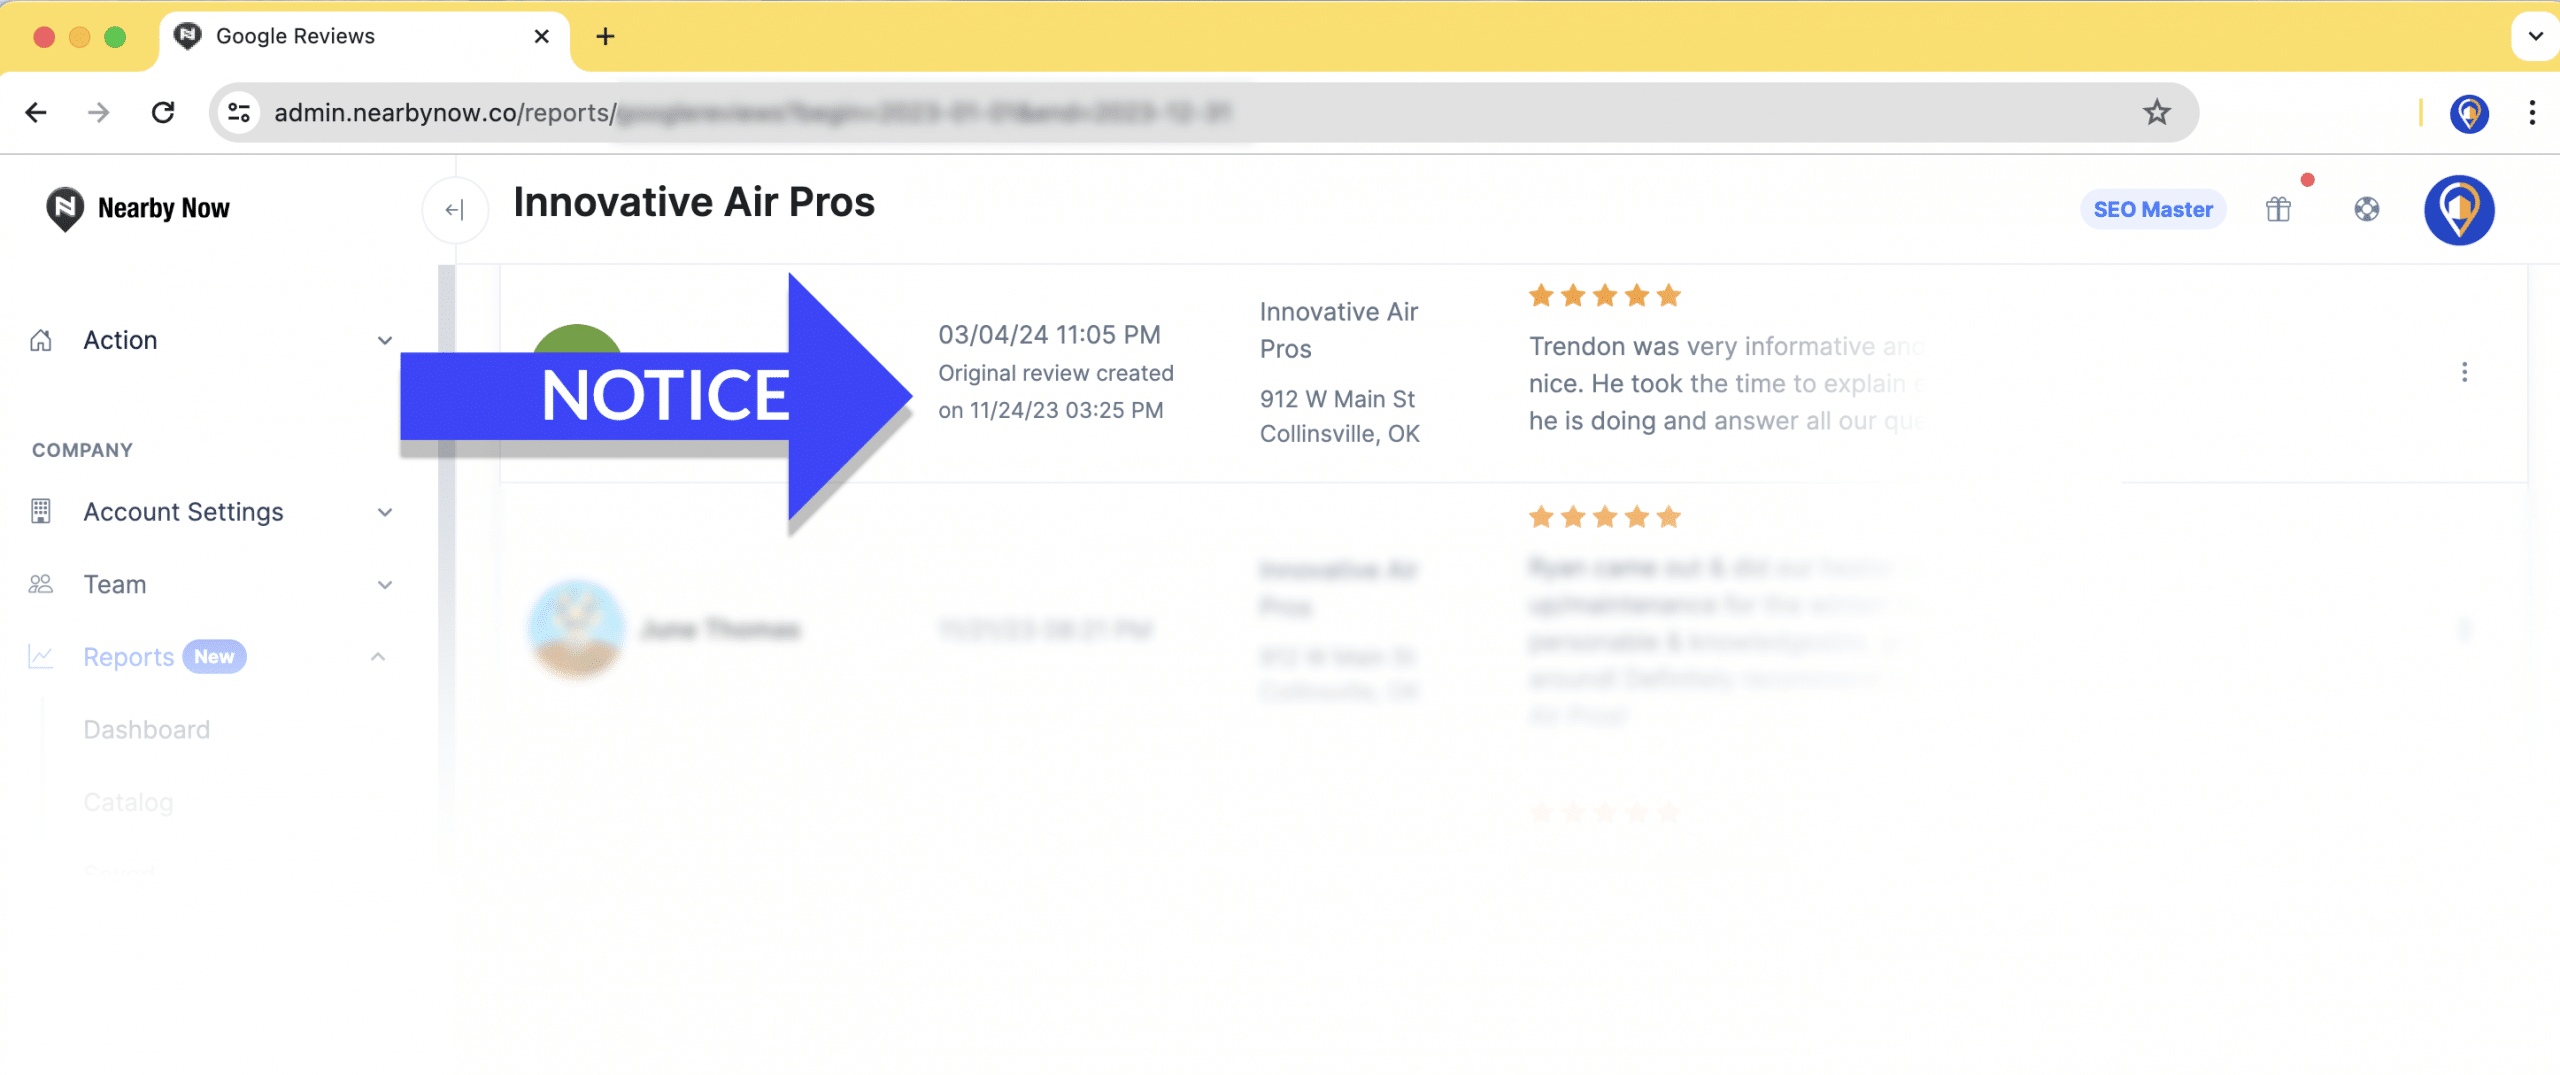 This is an informative image. It is a screenshot of the Nearby Now portal. There is an arrow pointing to the words "Original review created on 11/24" in order to show what it looks like when you get a second review from a customer.